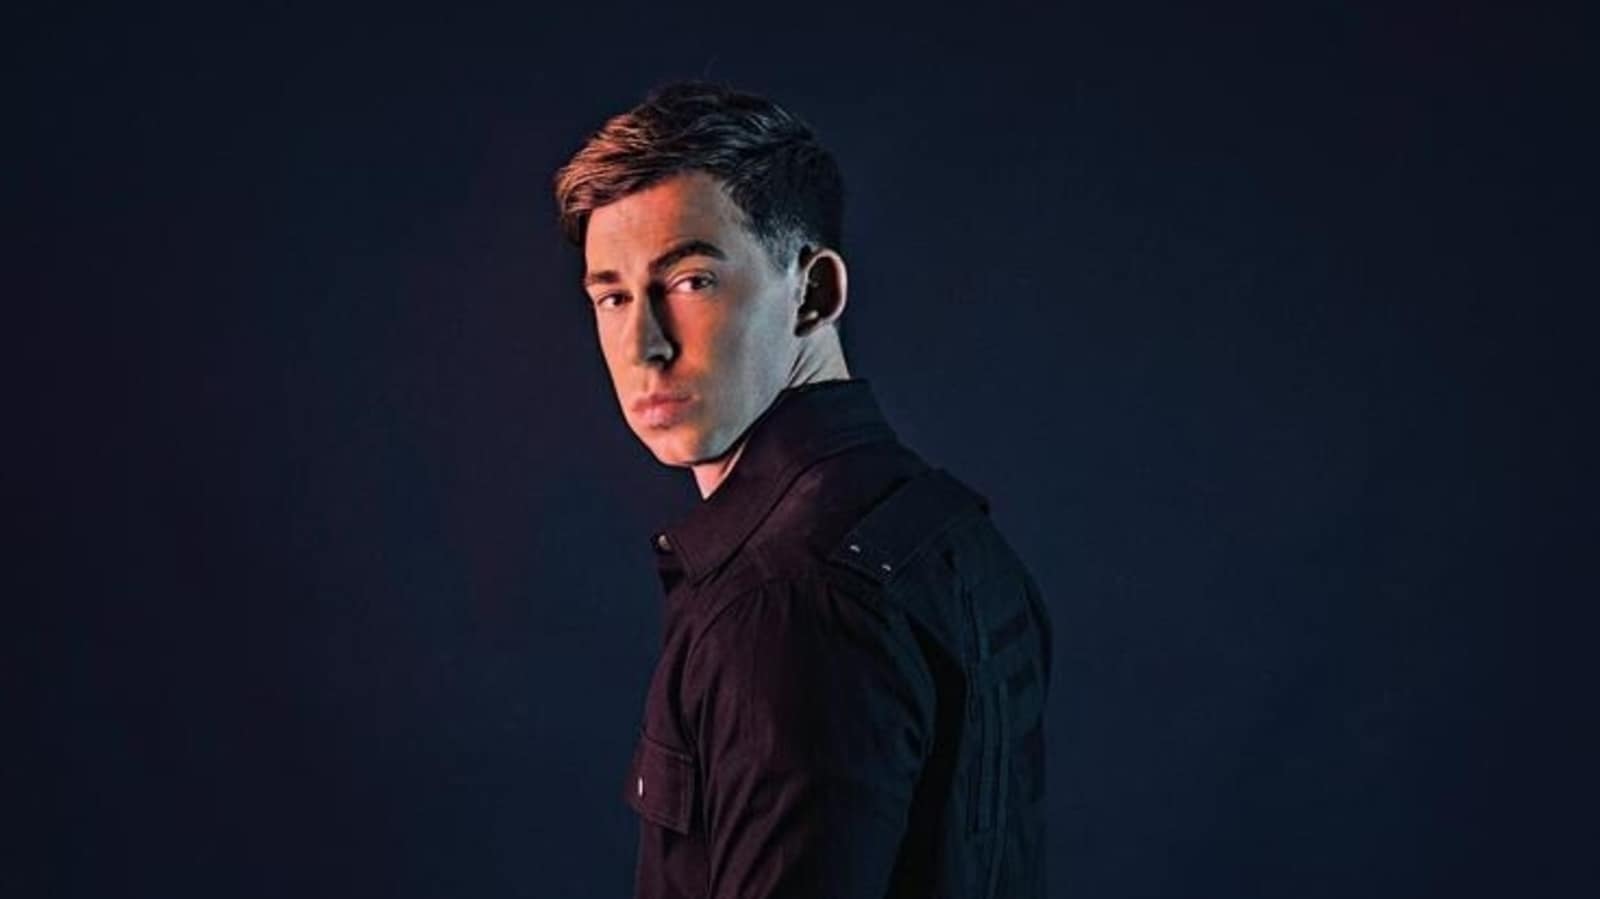 DJ Hardwell: In India, it’s always a crazy crowd to perform in front of